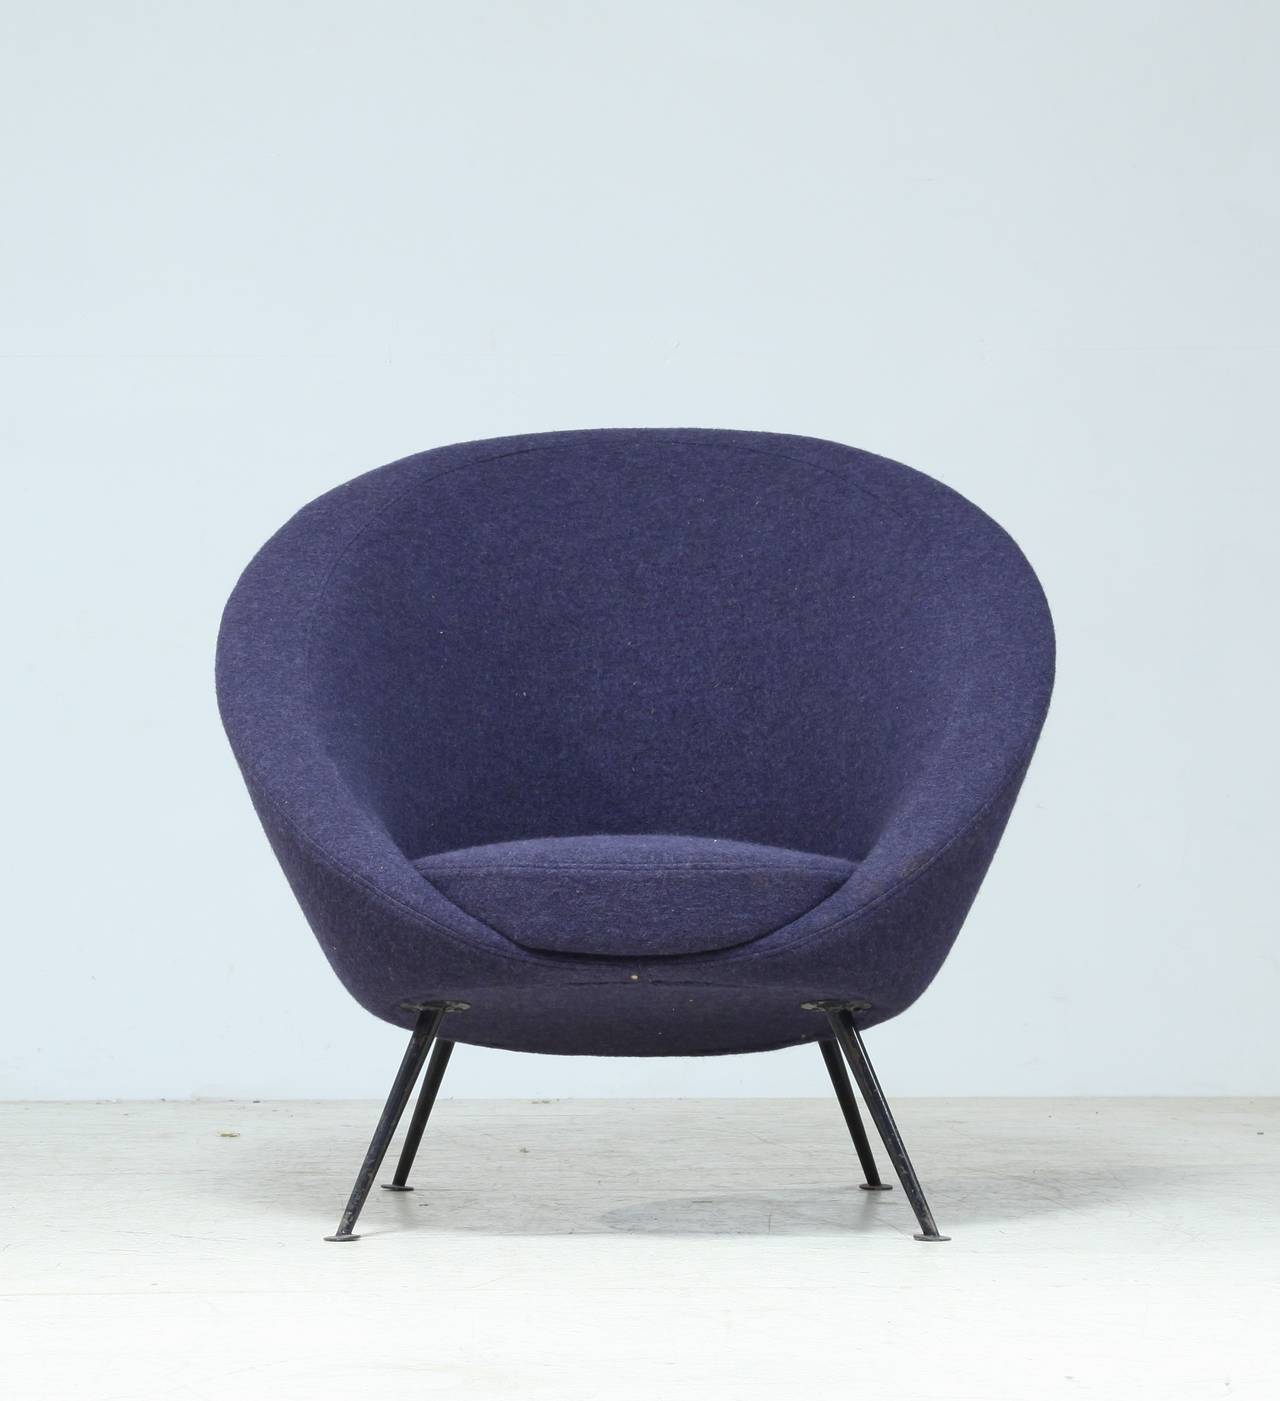 Italian Rare Ico Parisi Egg Chair Model 813 in Original Upholstery, Cassina, Italy, 1950 For Sale